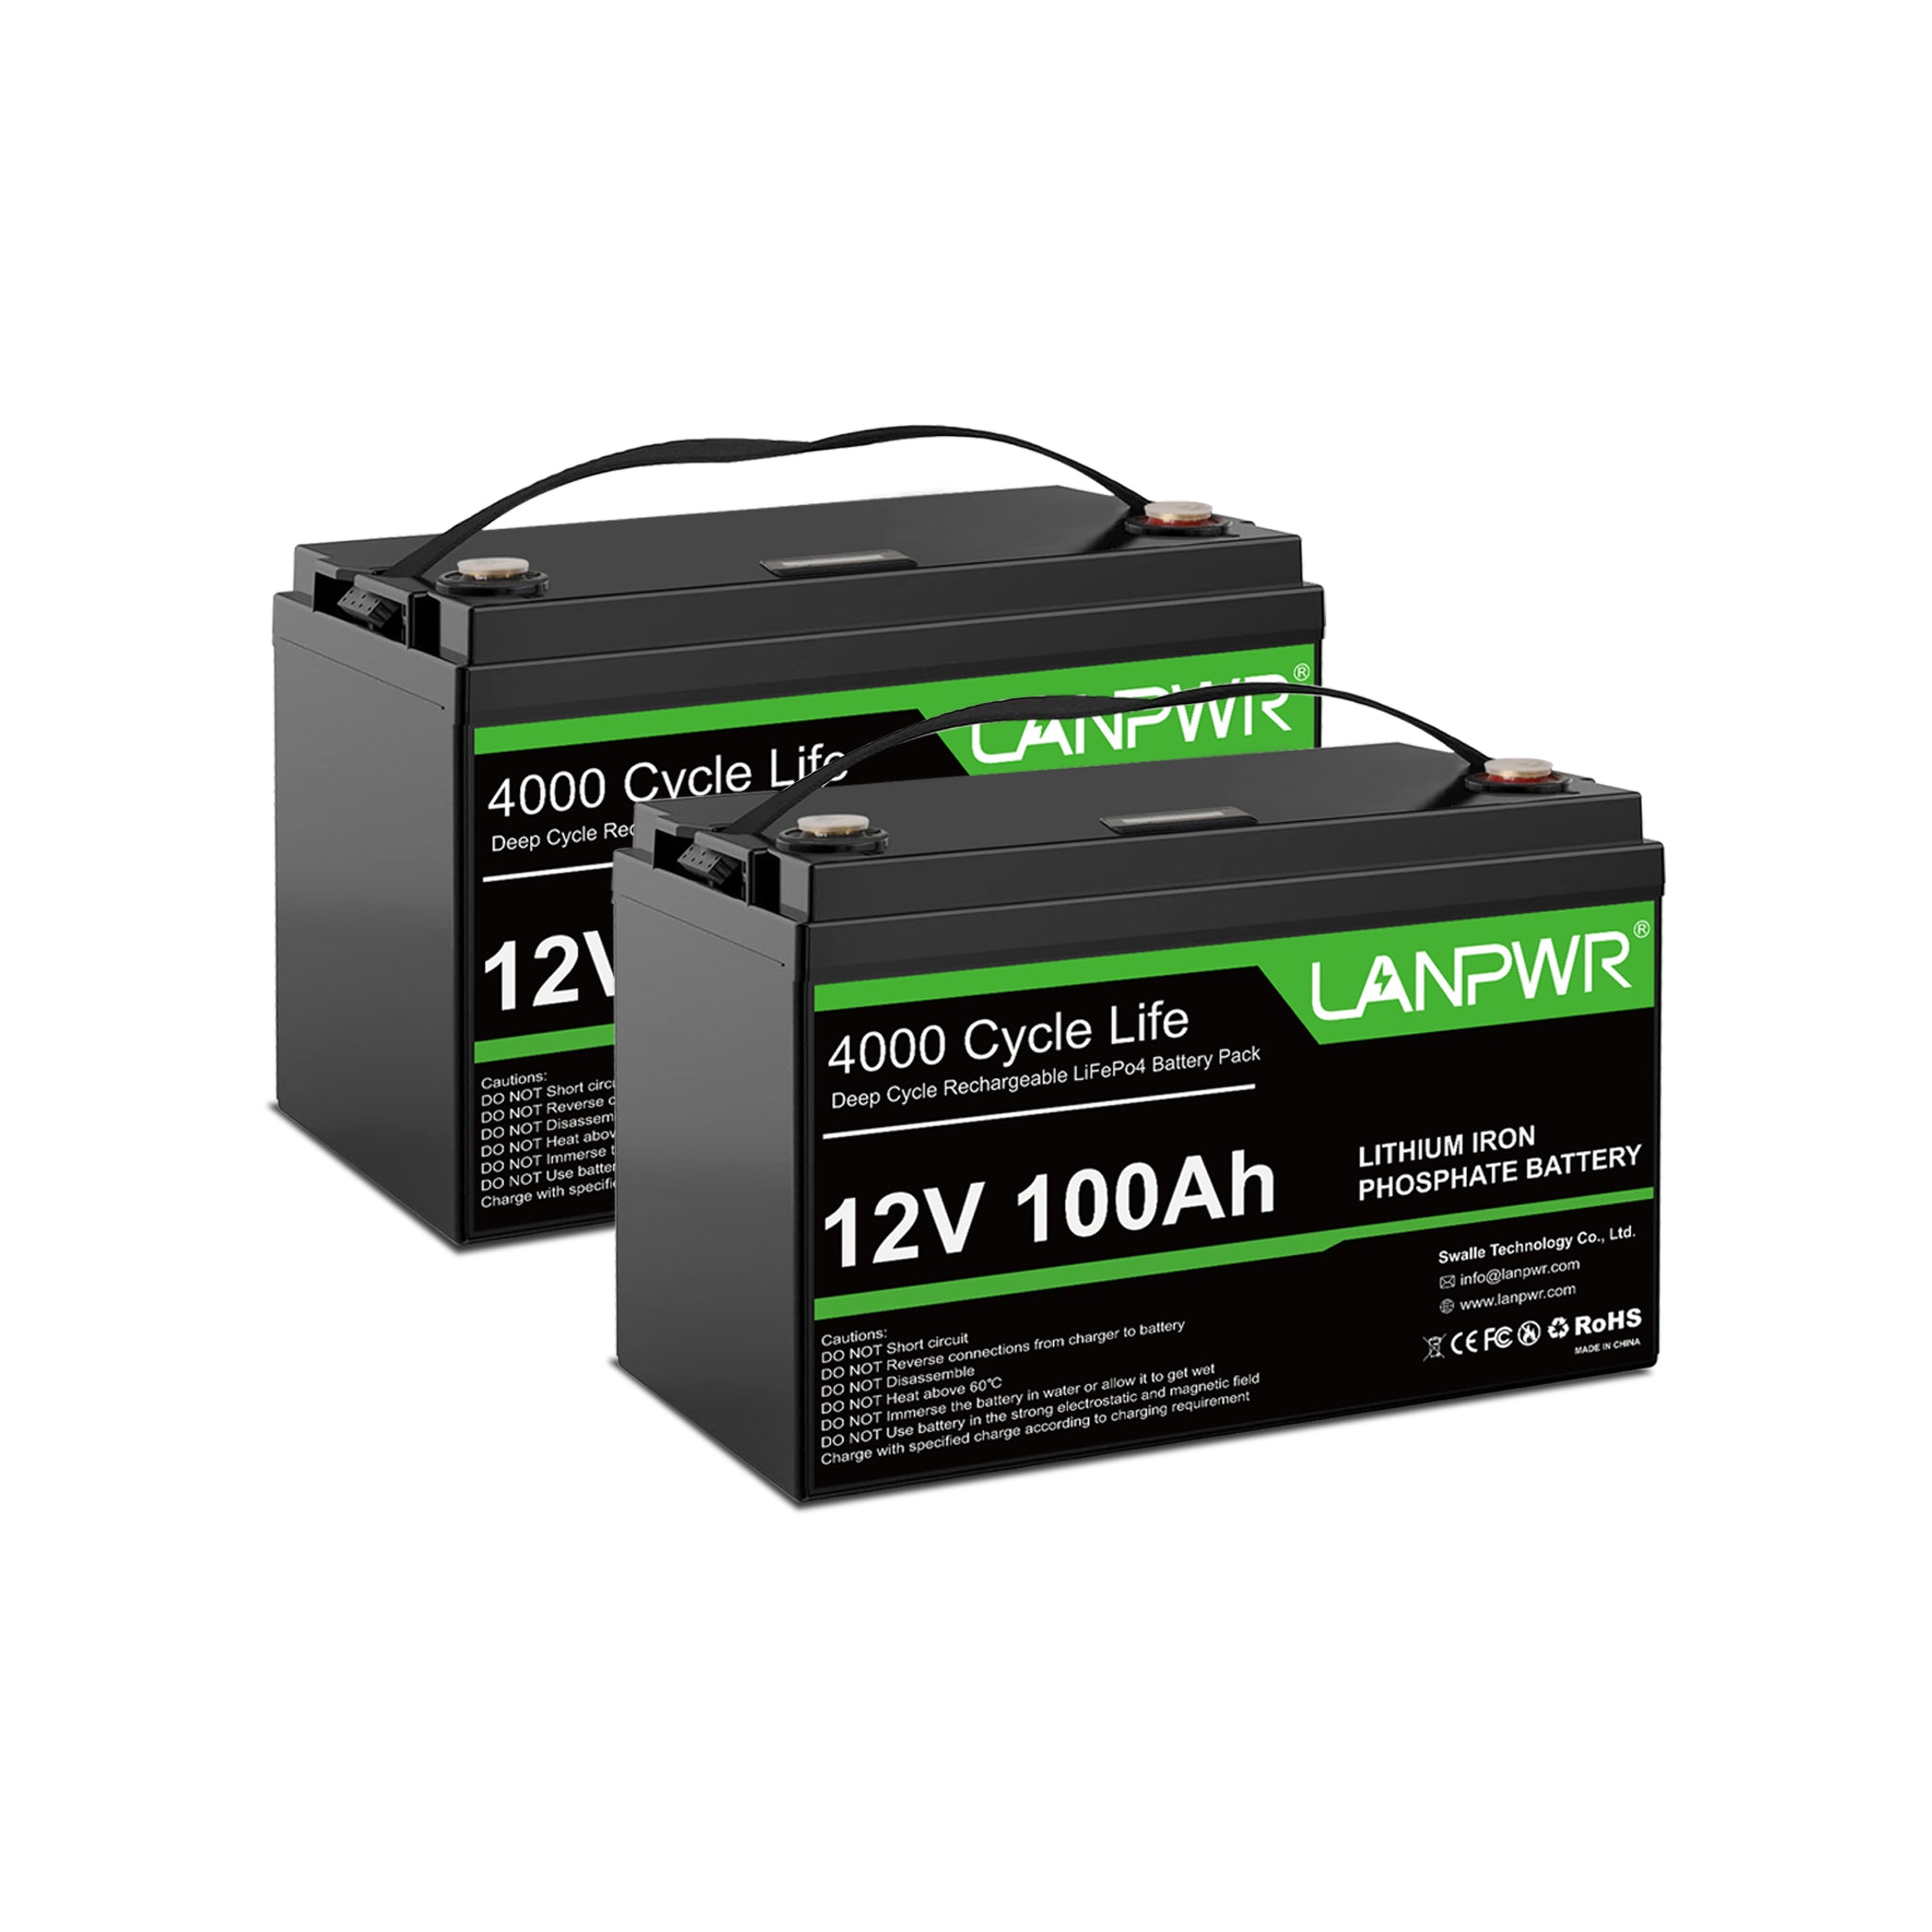 【Pre-order】LANPWR 12V 100Ah LiFePO4 Battery with 4000+ Deep Cycles & Built-In 100A BMS, 1280Wh Best RV Lithium Battery